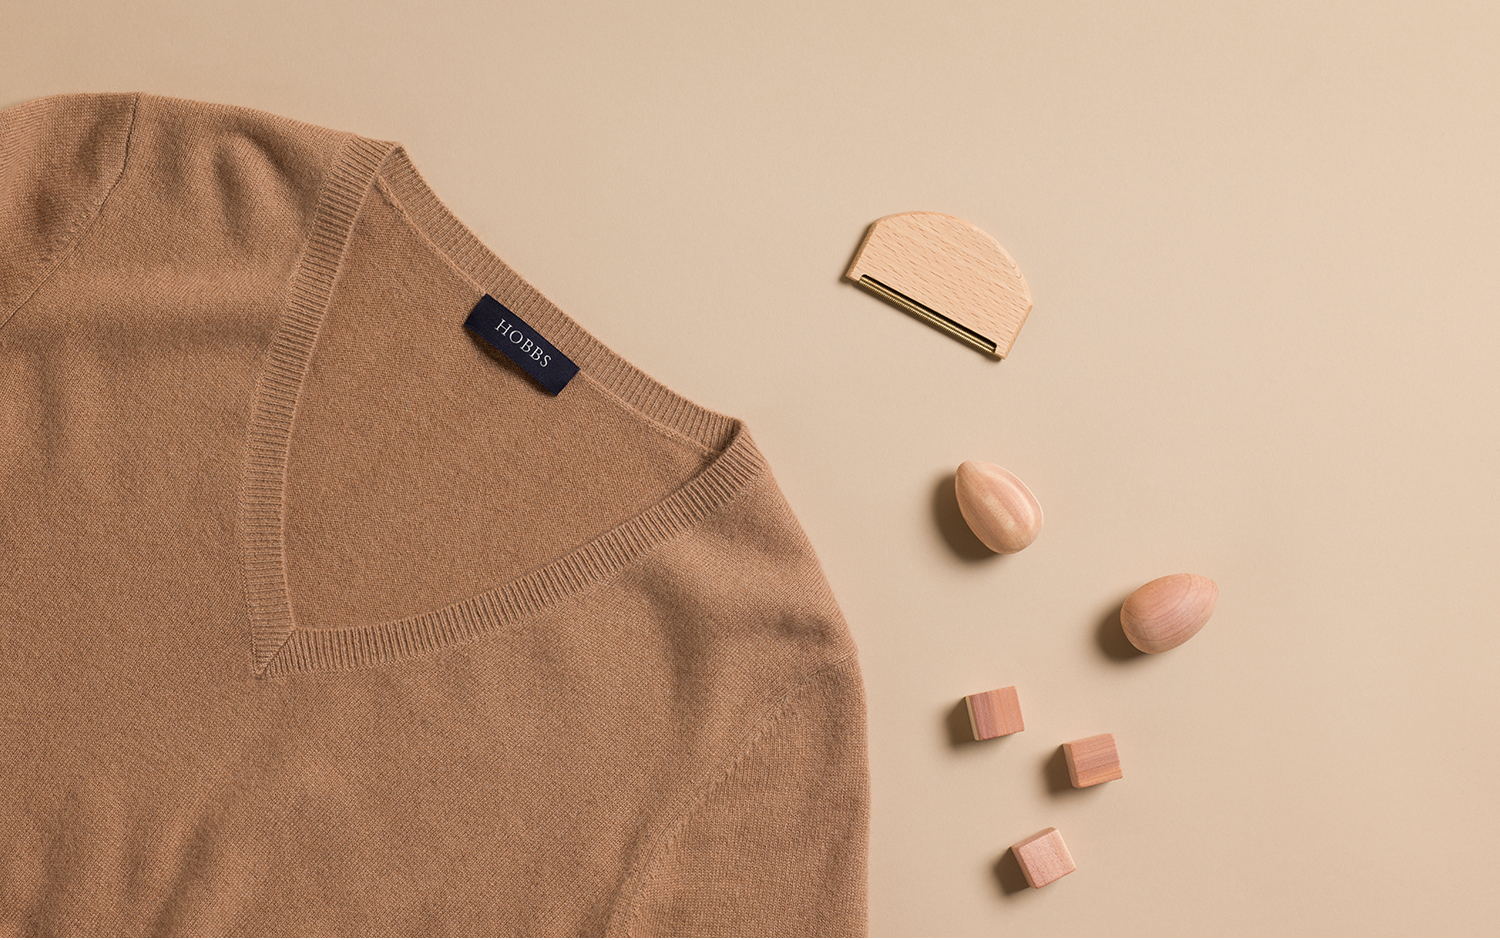 protect your knitwear, luxury fabrics like cashmere need extra care.